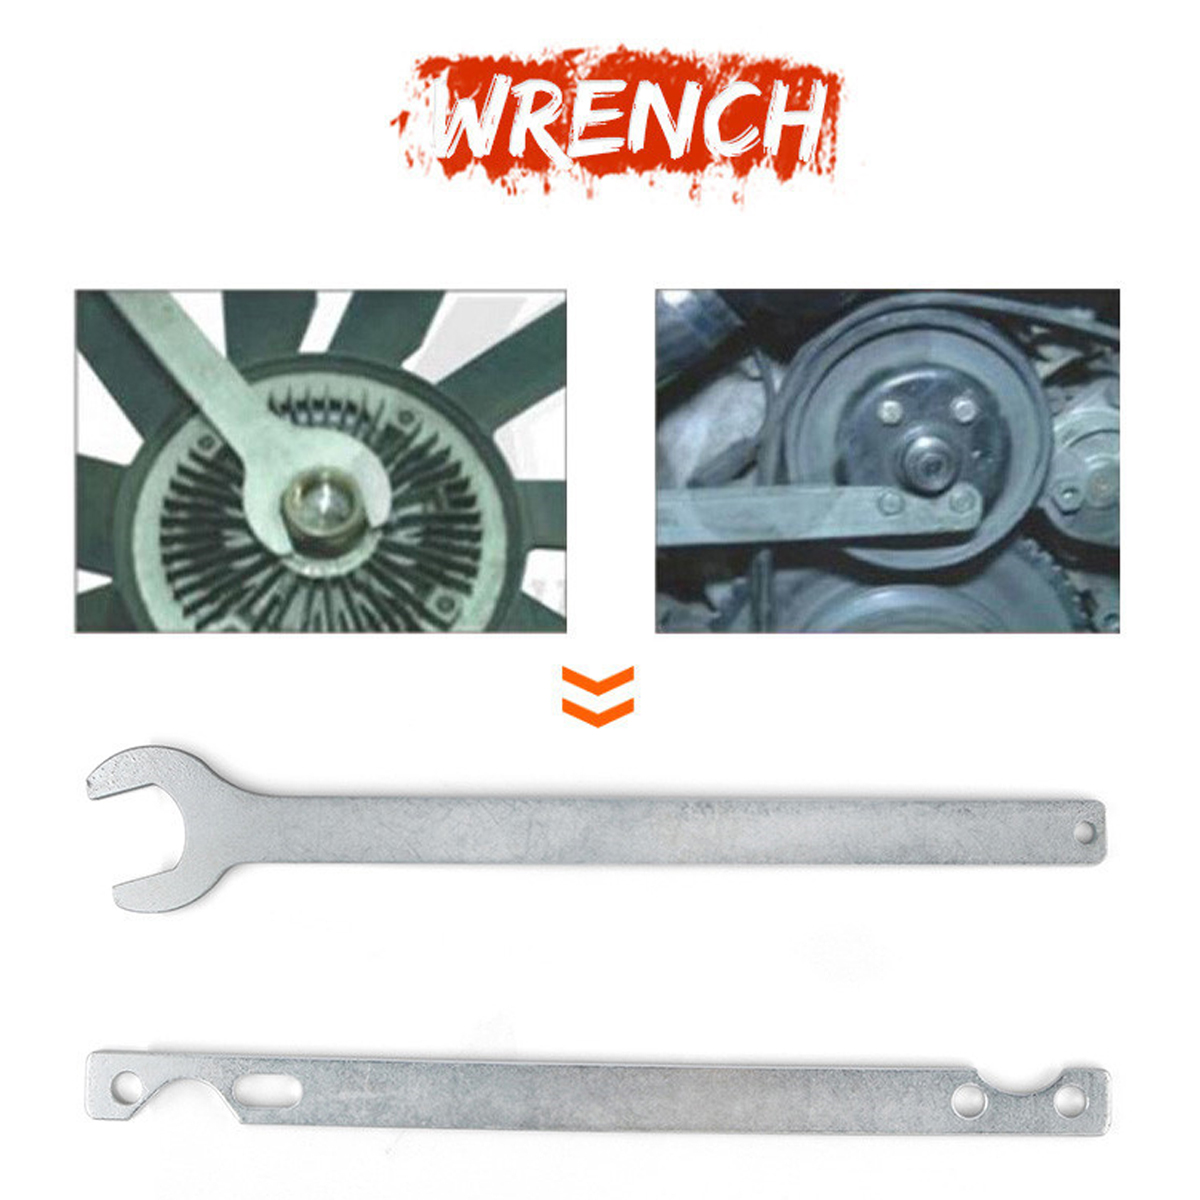 32mm-Fan-Clutch-Nut-Wrench-and-Water-Pump-Holder-Tool-Kit-Removal-Wrench-1900883-9